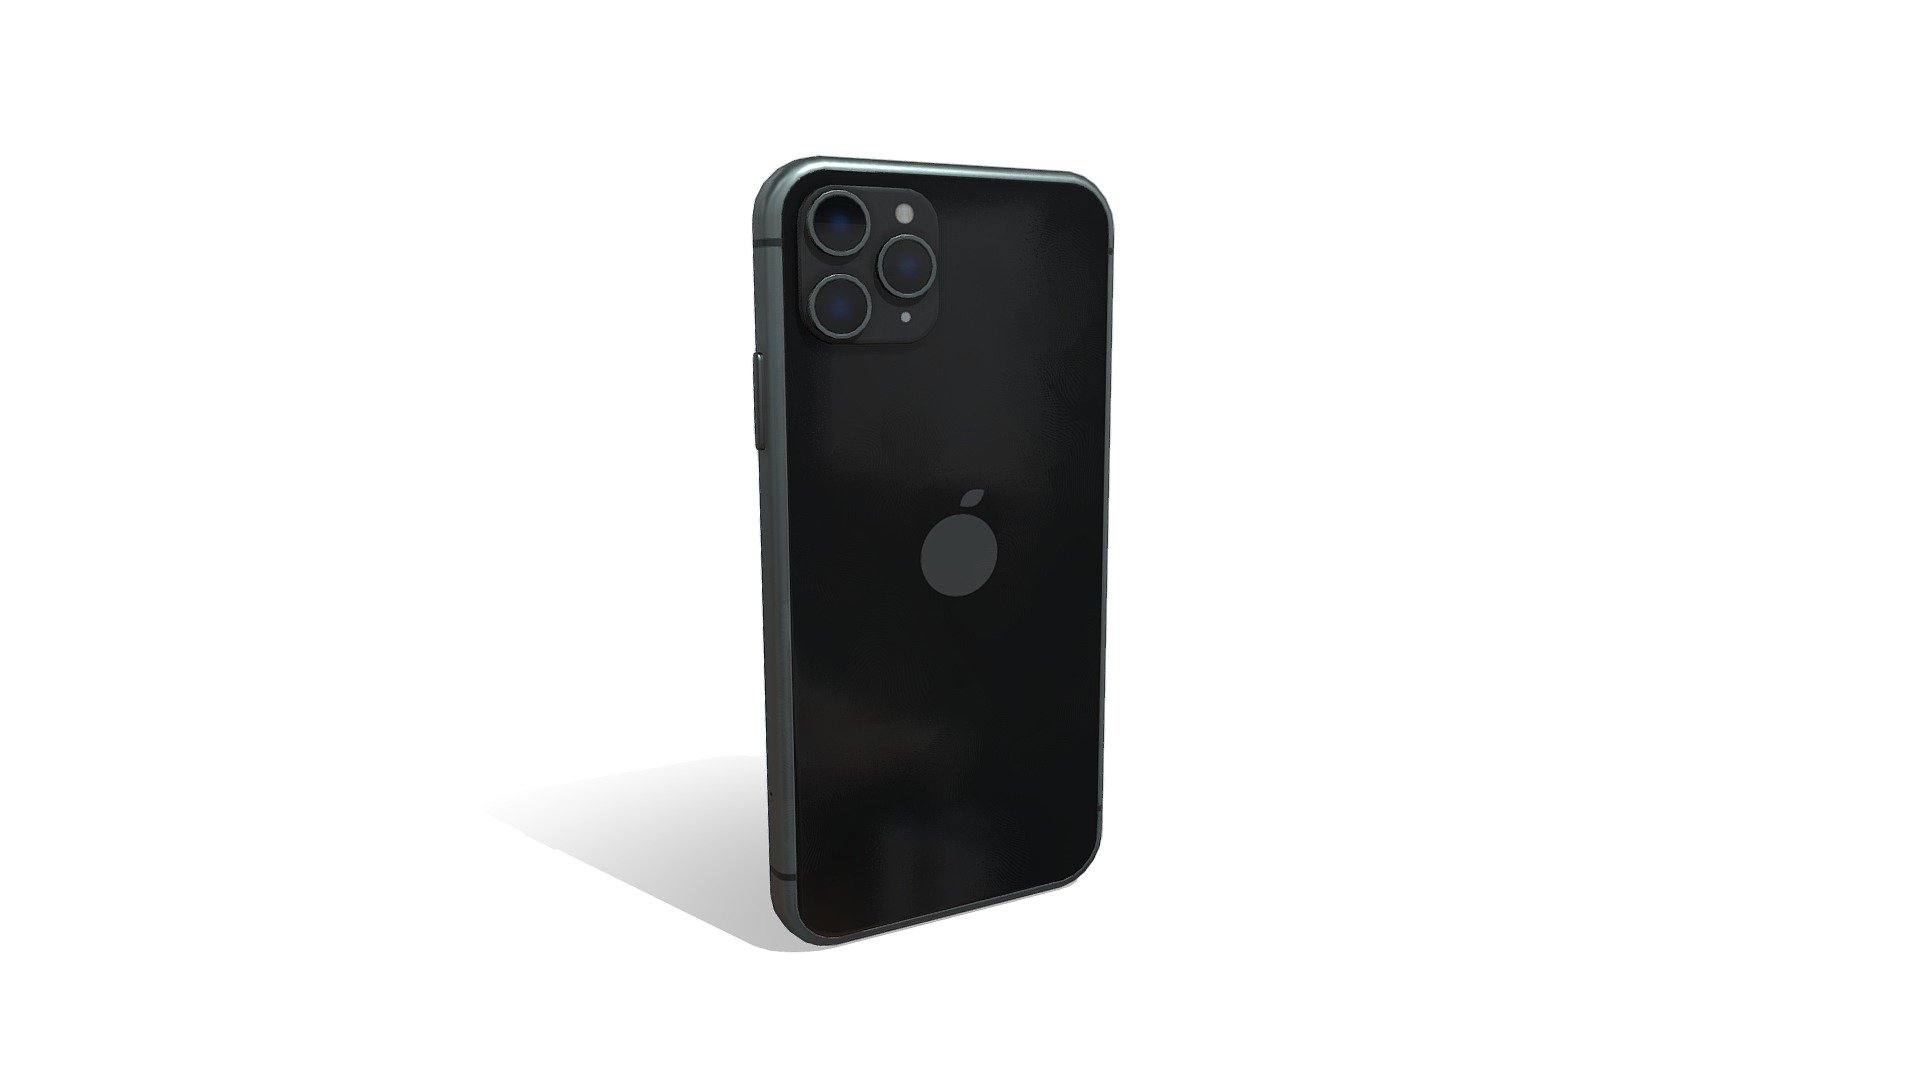 A Low Poly Smart Phone Model for Game-Ready in Realistic Style with PBR Textures !!

Tissue 3d model      
 
Files Include     

- 3ds Max 2020
- FBX
- OBJ
- DAE
- 3ds 

Seperate Materials per Objects  
 

Textures include 
- Base Color                        

- Normal                            

- Roughness                         

- Height                              

- Metallic                            


Features:
- Poly : 1026
- Verts: 1108

Texture Size 4096*4096  files PNG format                     


High-resolution textures, UV unwrapped.             
 

Clean topology, Non-overlap UVs                        
 


Thanks you very much for Your Support my Models Asset and Hoping that my models are useful for your Project :)                   

You can give a likes and leave a review if you like its!!    
 
  

If the files has problems or have any question, please contact me 3d model